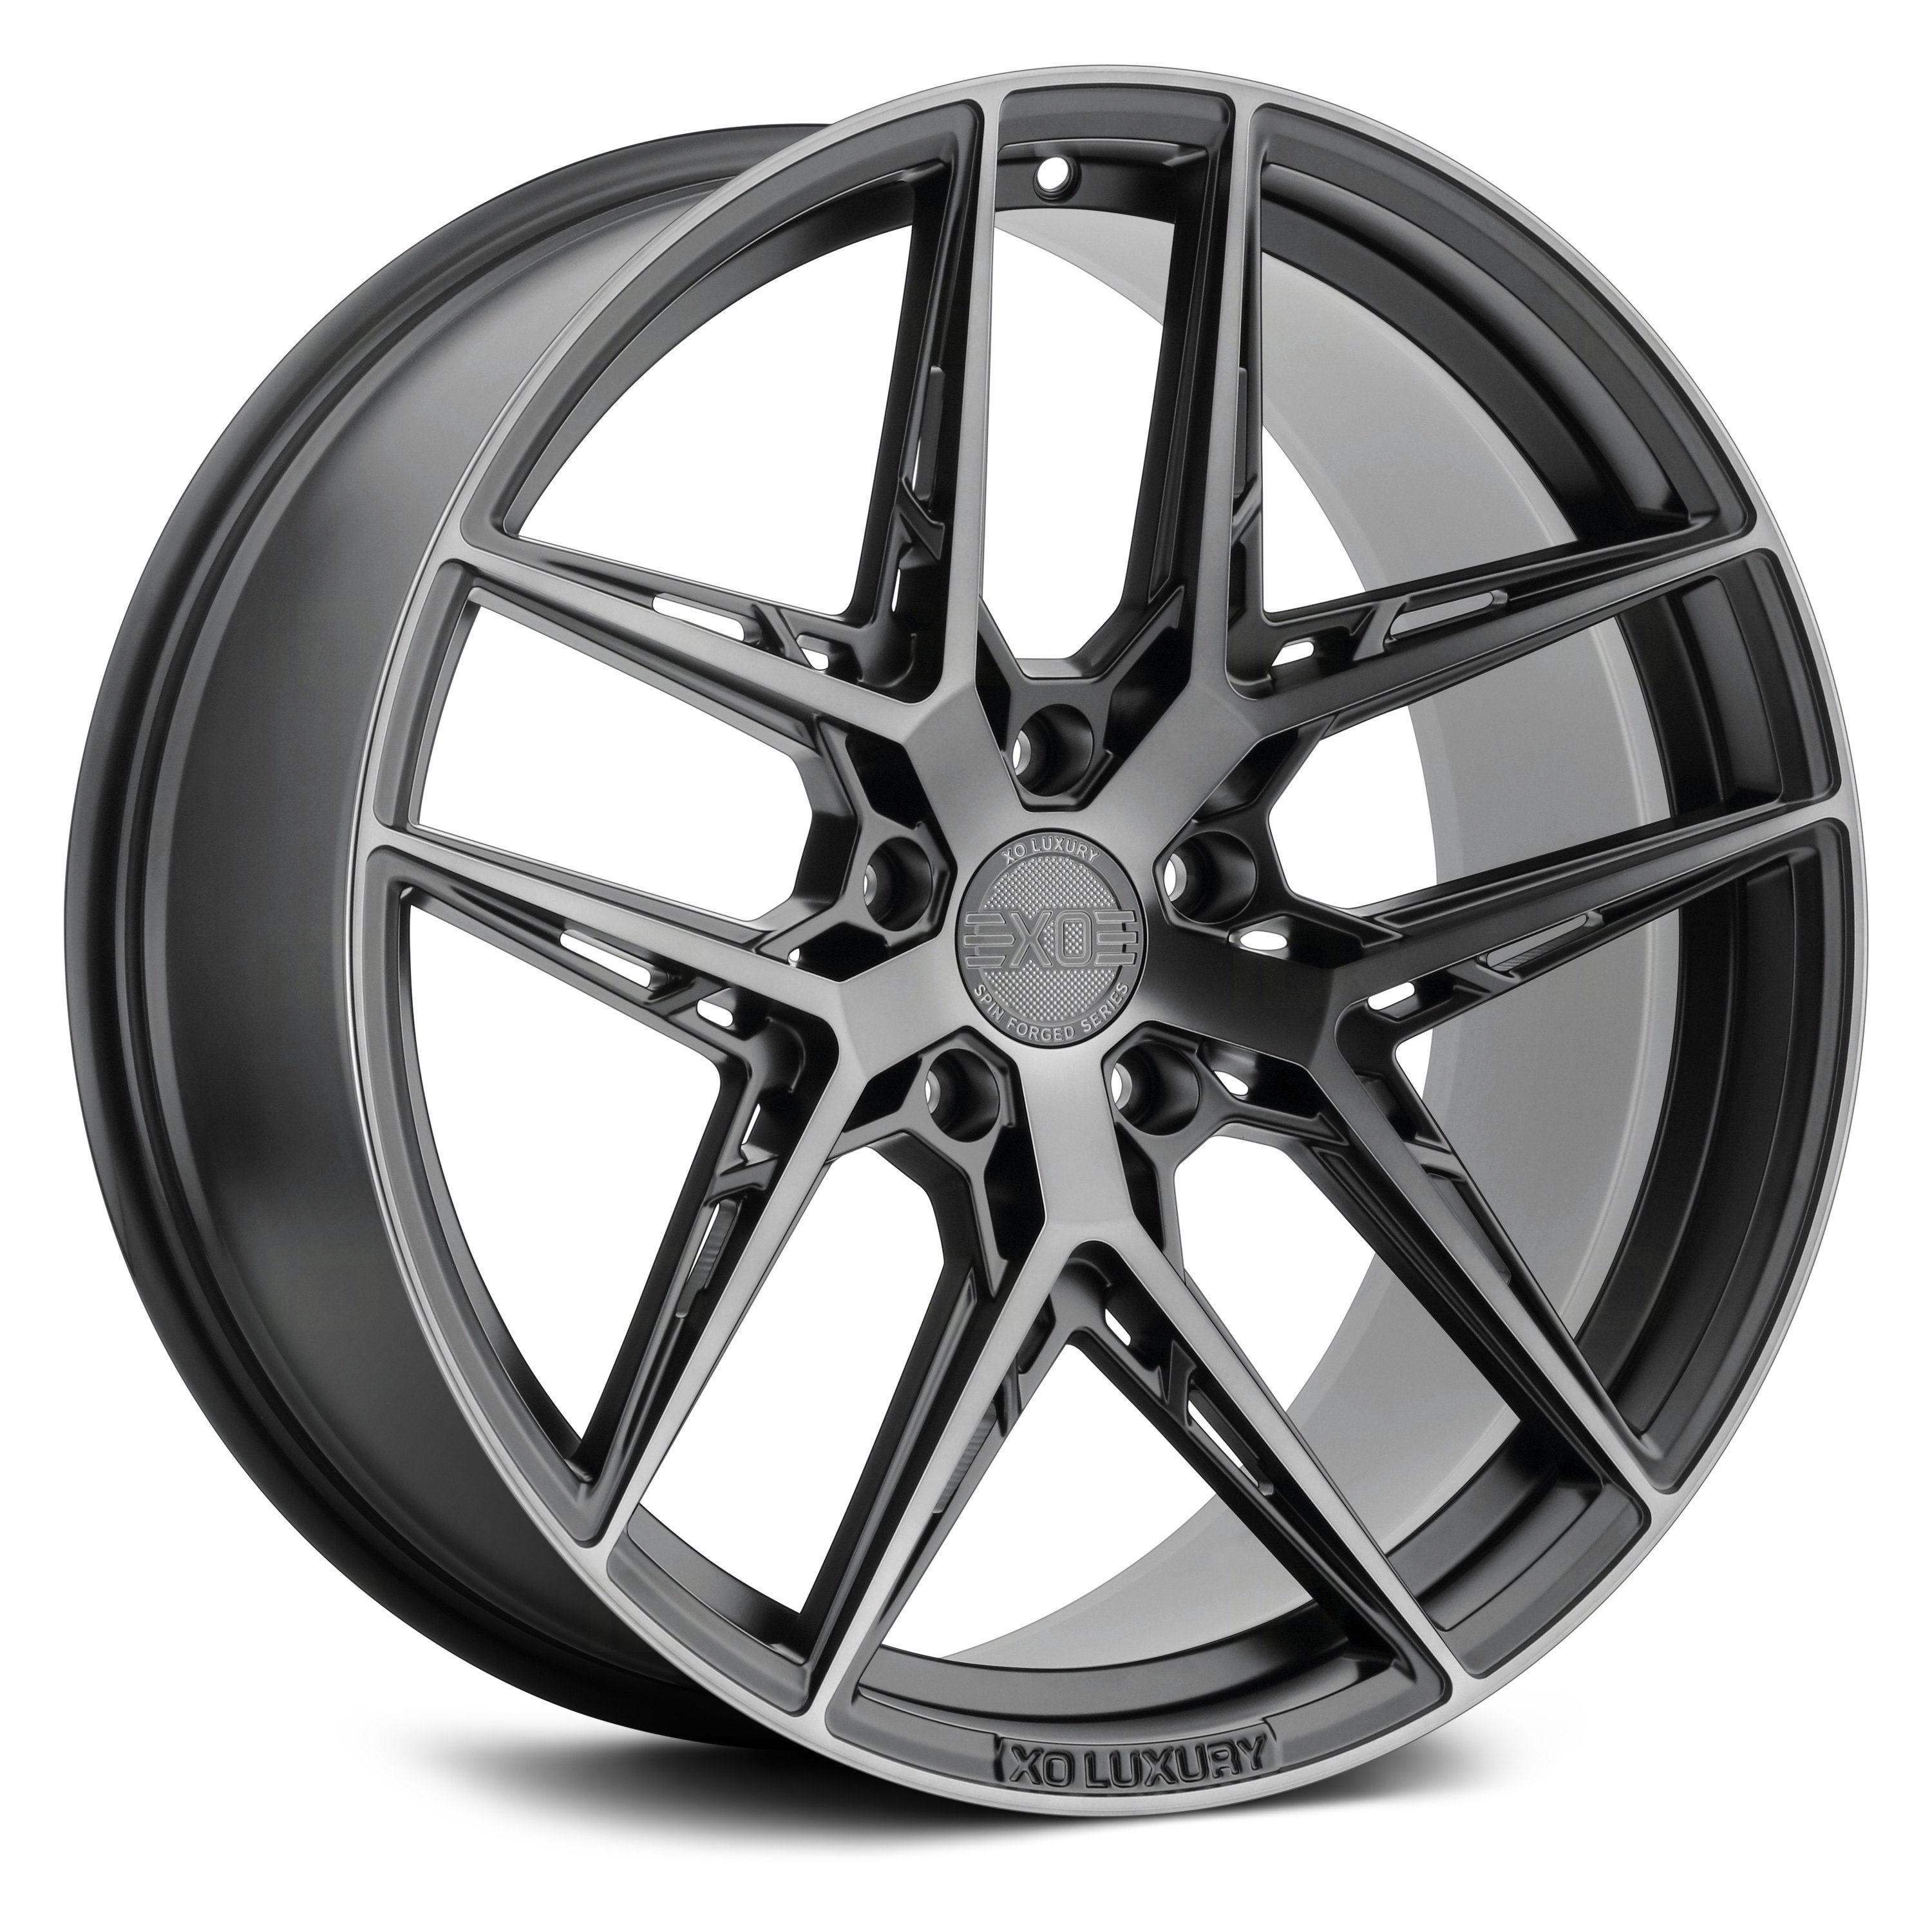 XO® CAIRO Wheels - Matte Black with Machined Face and Dark Tint 